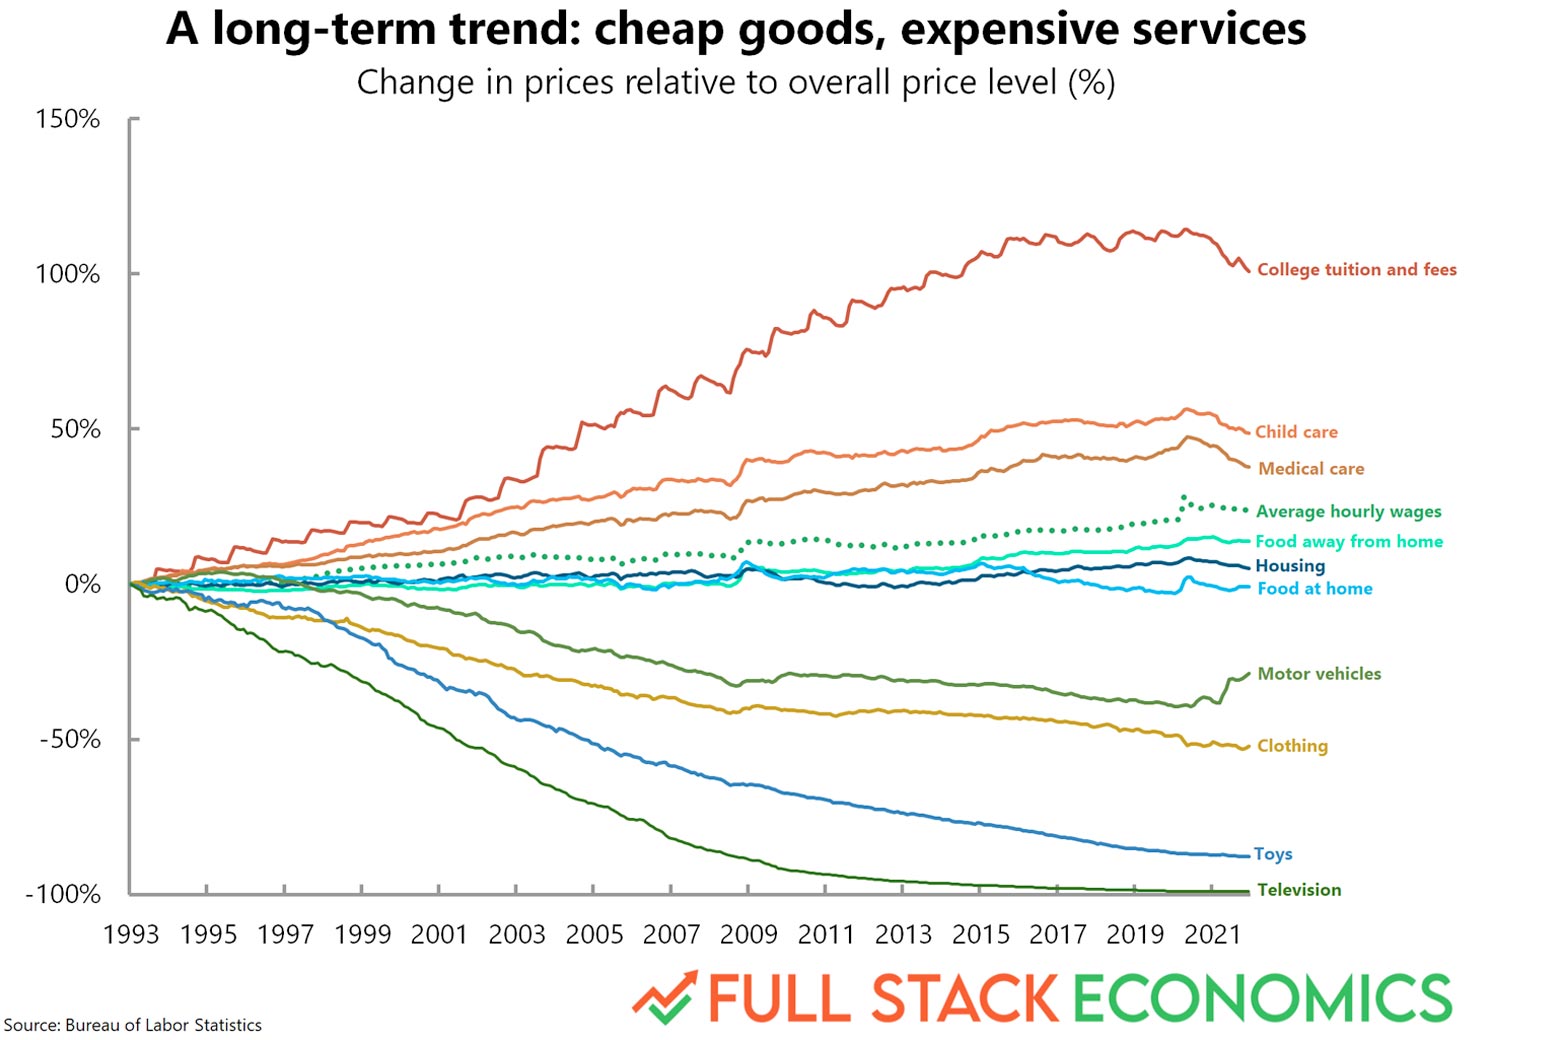 Chart showing long-term trends of increase in cost of services and decrease in cost of goods from 1993 to 2021